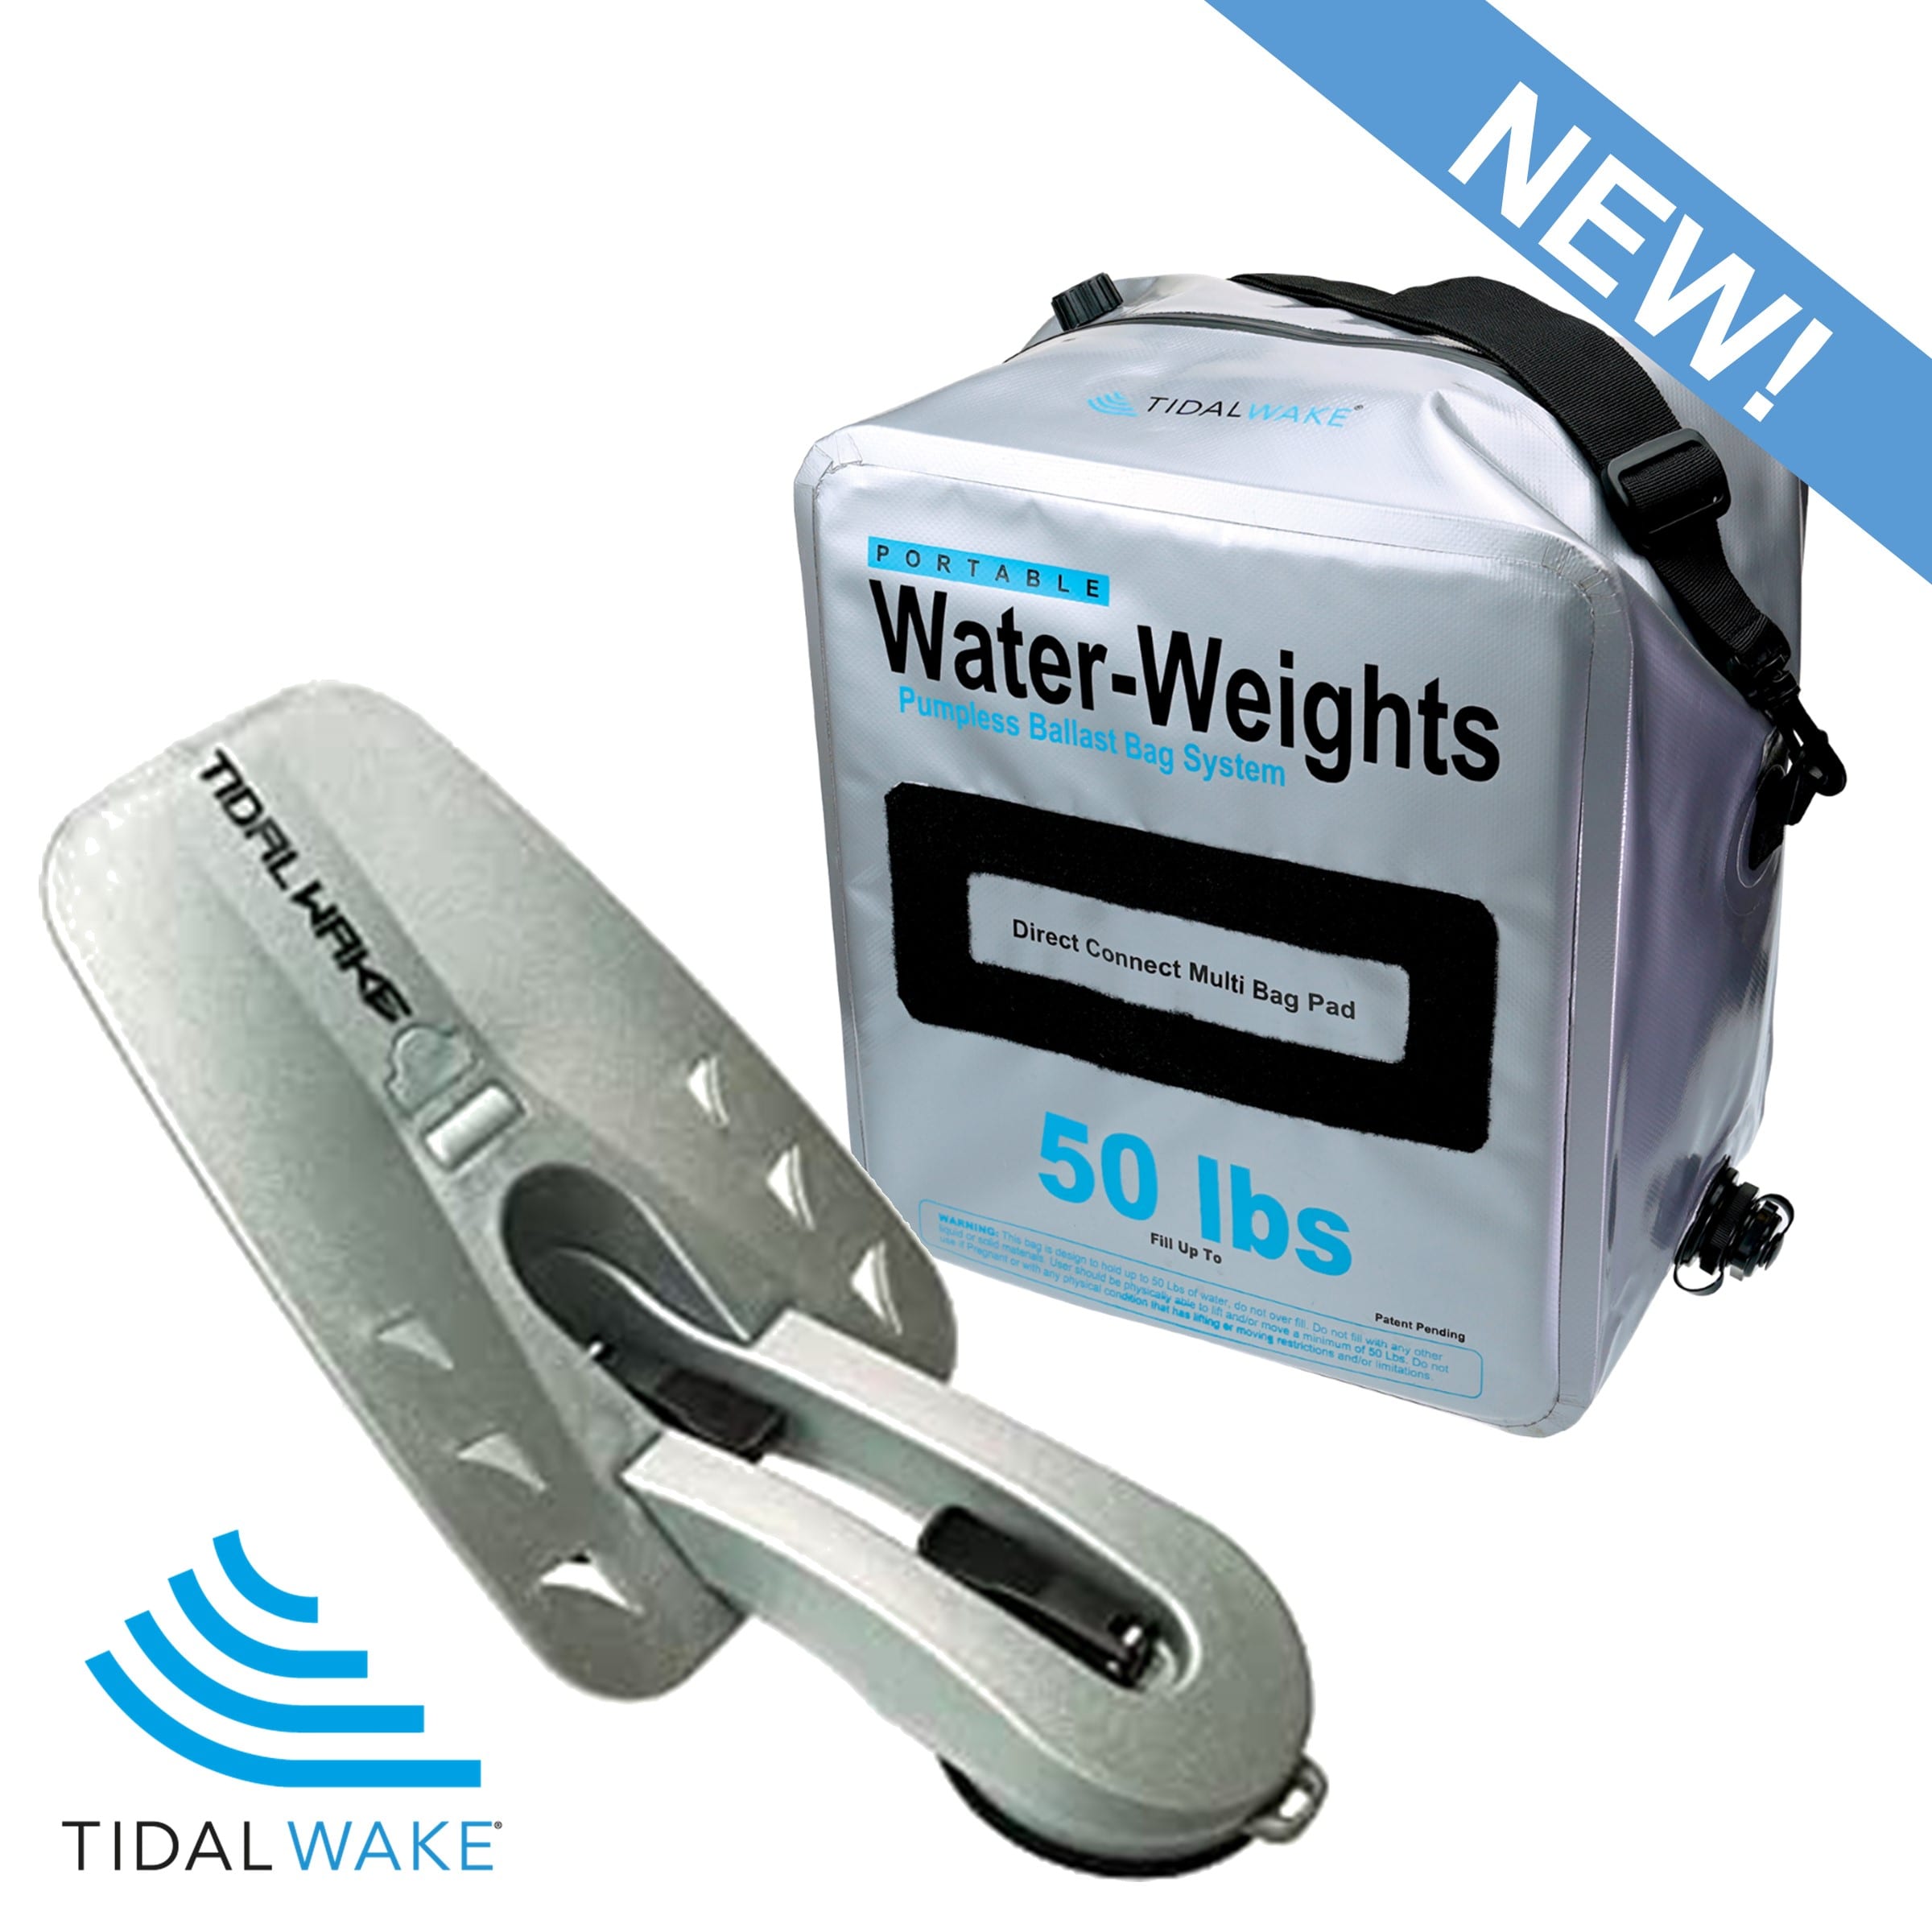 Tidal Wake Water-Weights Ballast Bags 4 Pack Holds 50# of Water Per Bag 22738 